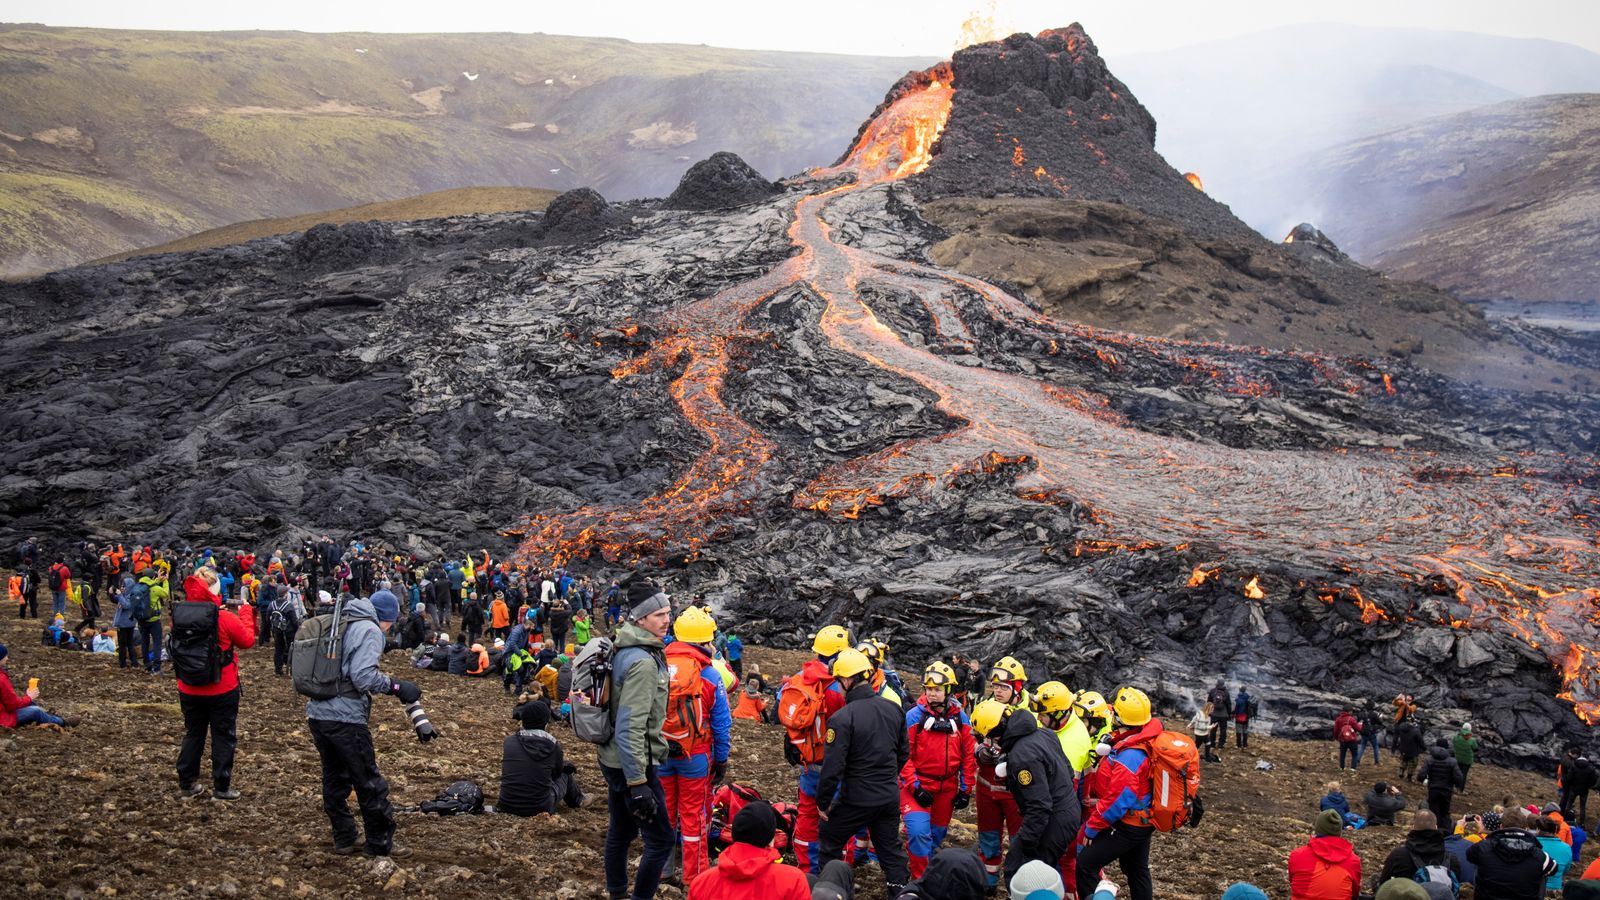 Crowds gather at the volcanic site on the Reykjanes Peninsula in the aftermath of the eruption in Iceland.